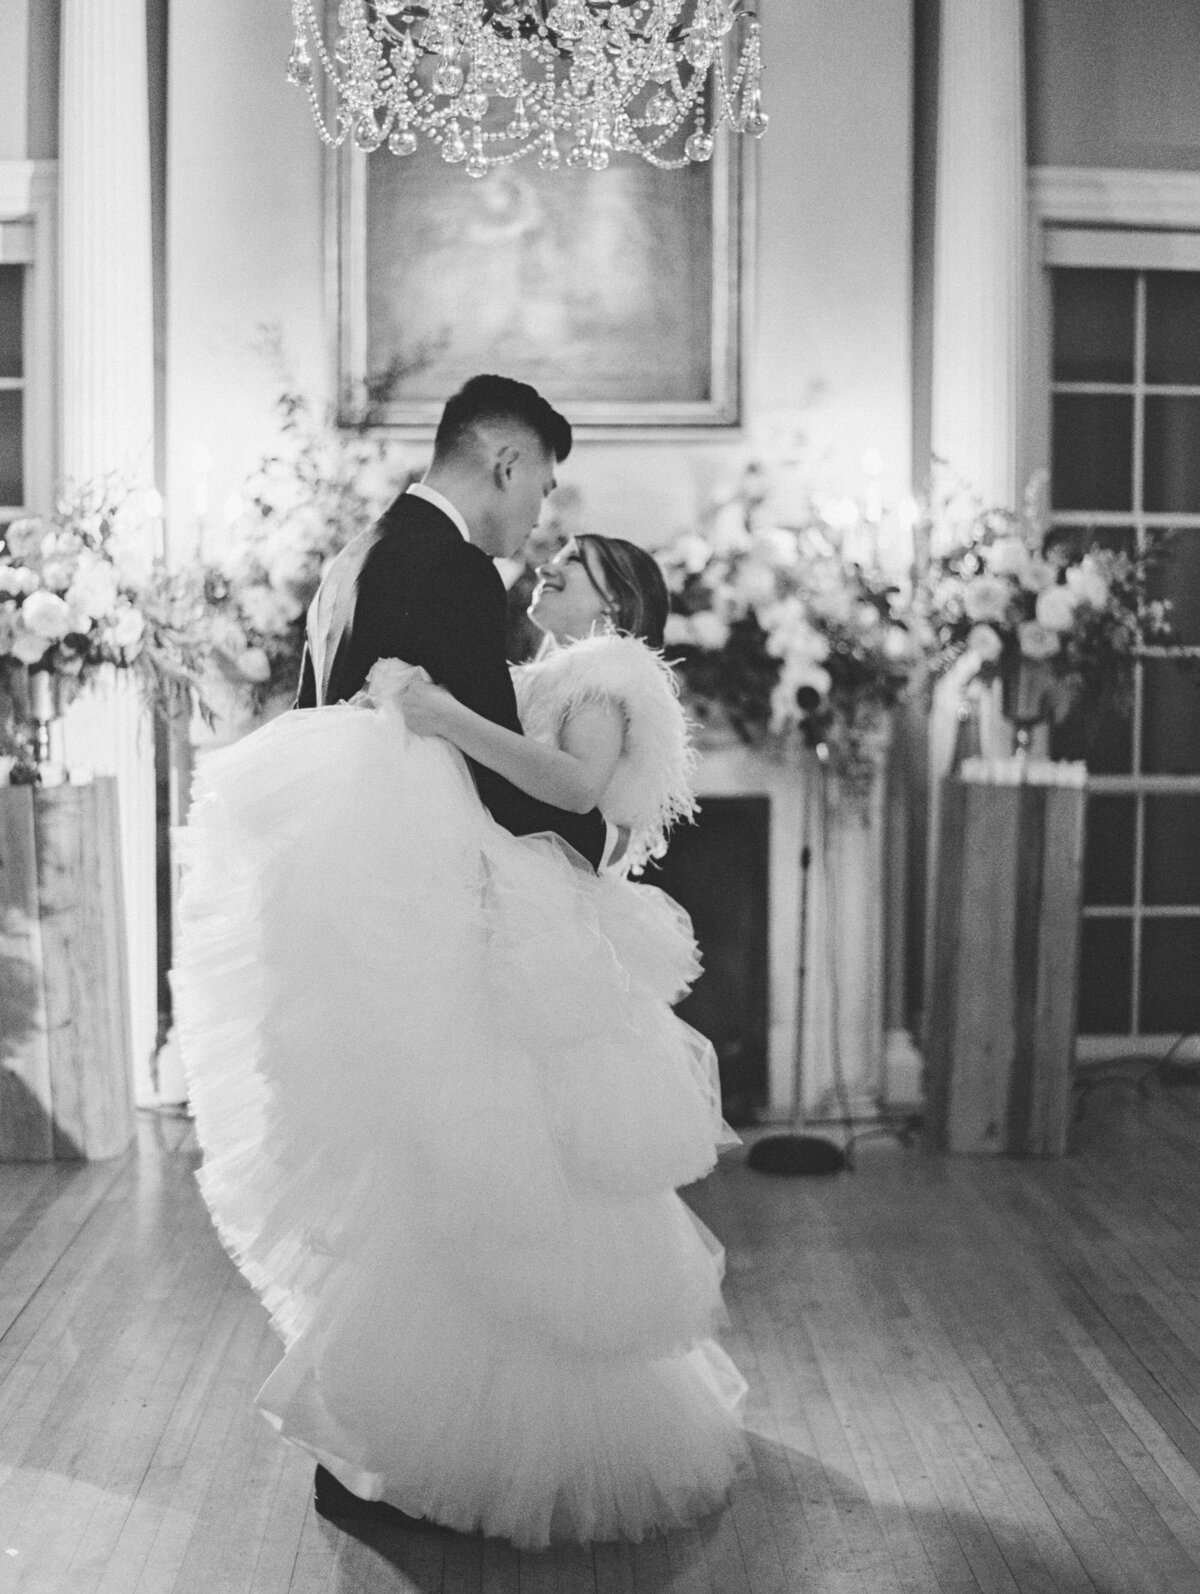 New Years Eve wedding photos at the Lyman Estate in Waltham Massachusetts.